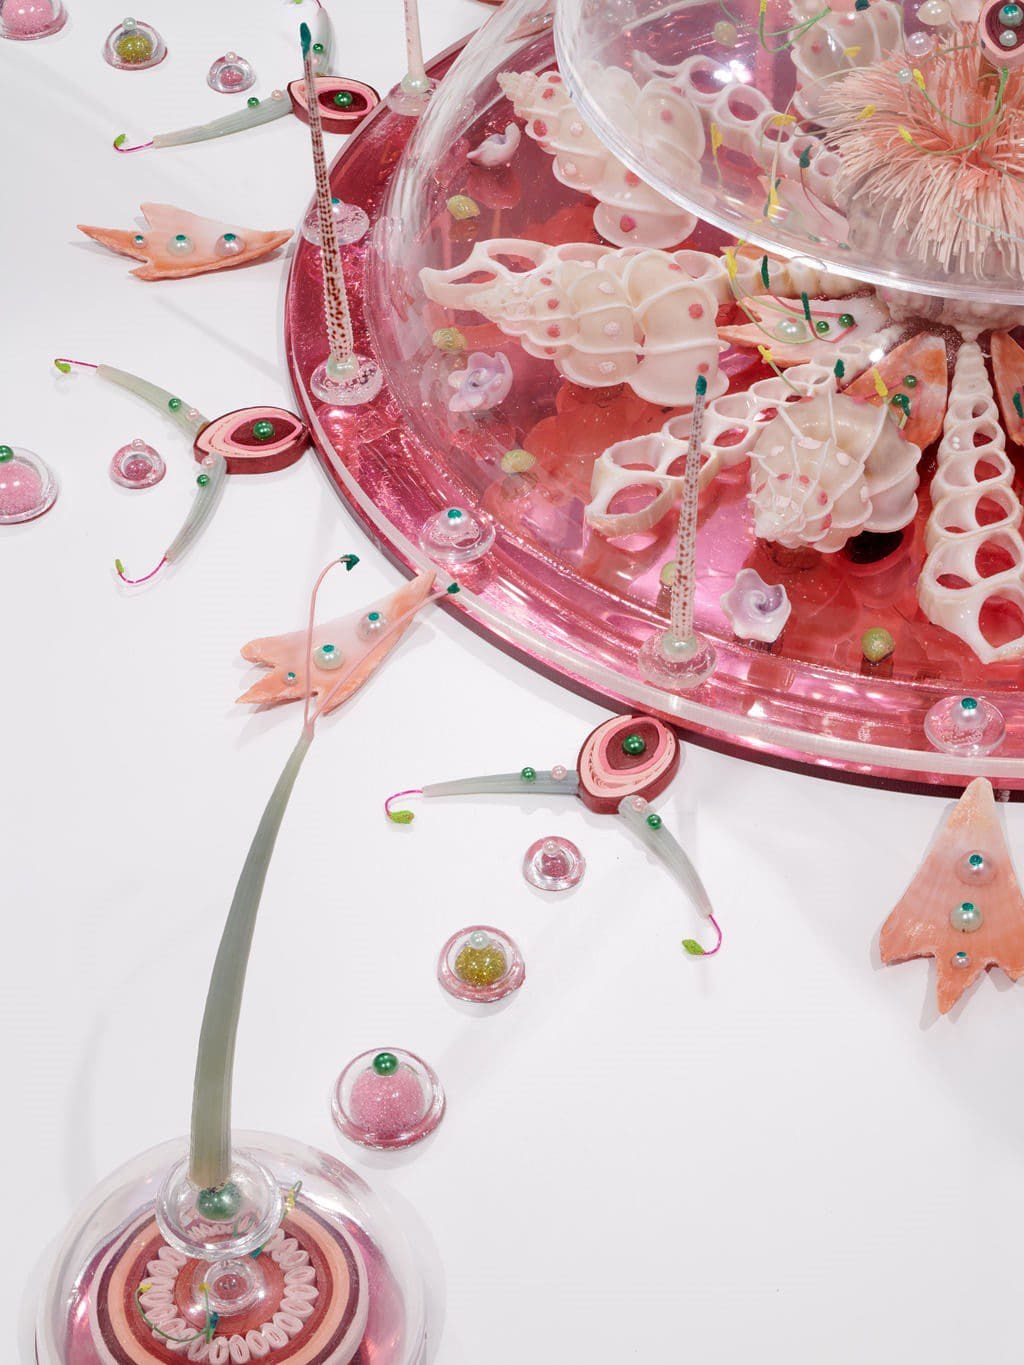 Various cut and polished seashells, urchin spines, green tusks, squilla claws, butterfly wings, cut paper, colored powder pigments, colored plastic beads, acrylic domes, brass rod, colored and mirrored Plexiglas, glue, acrylic on wood.